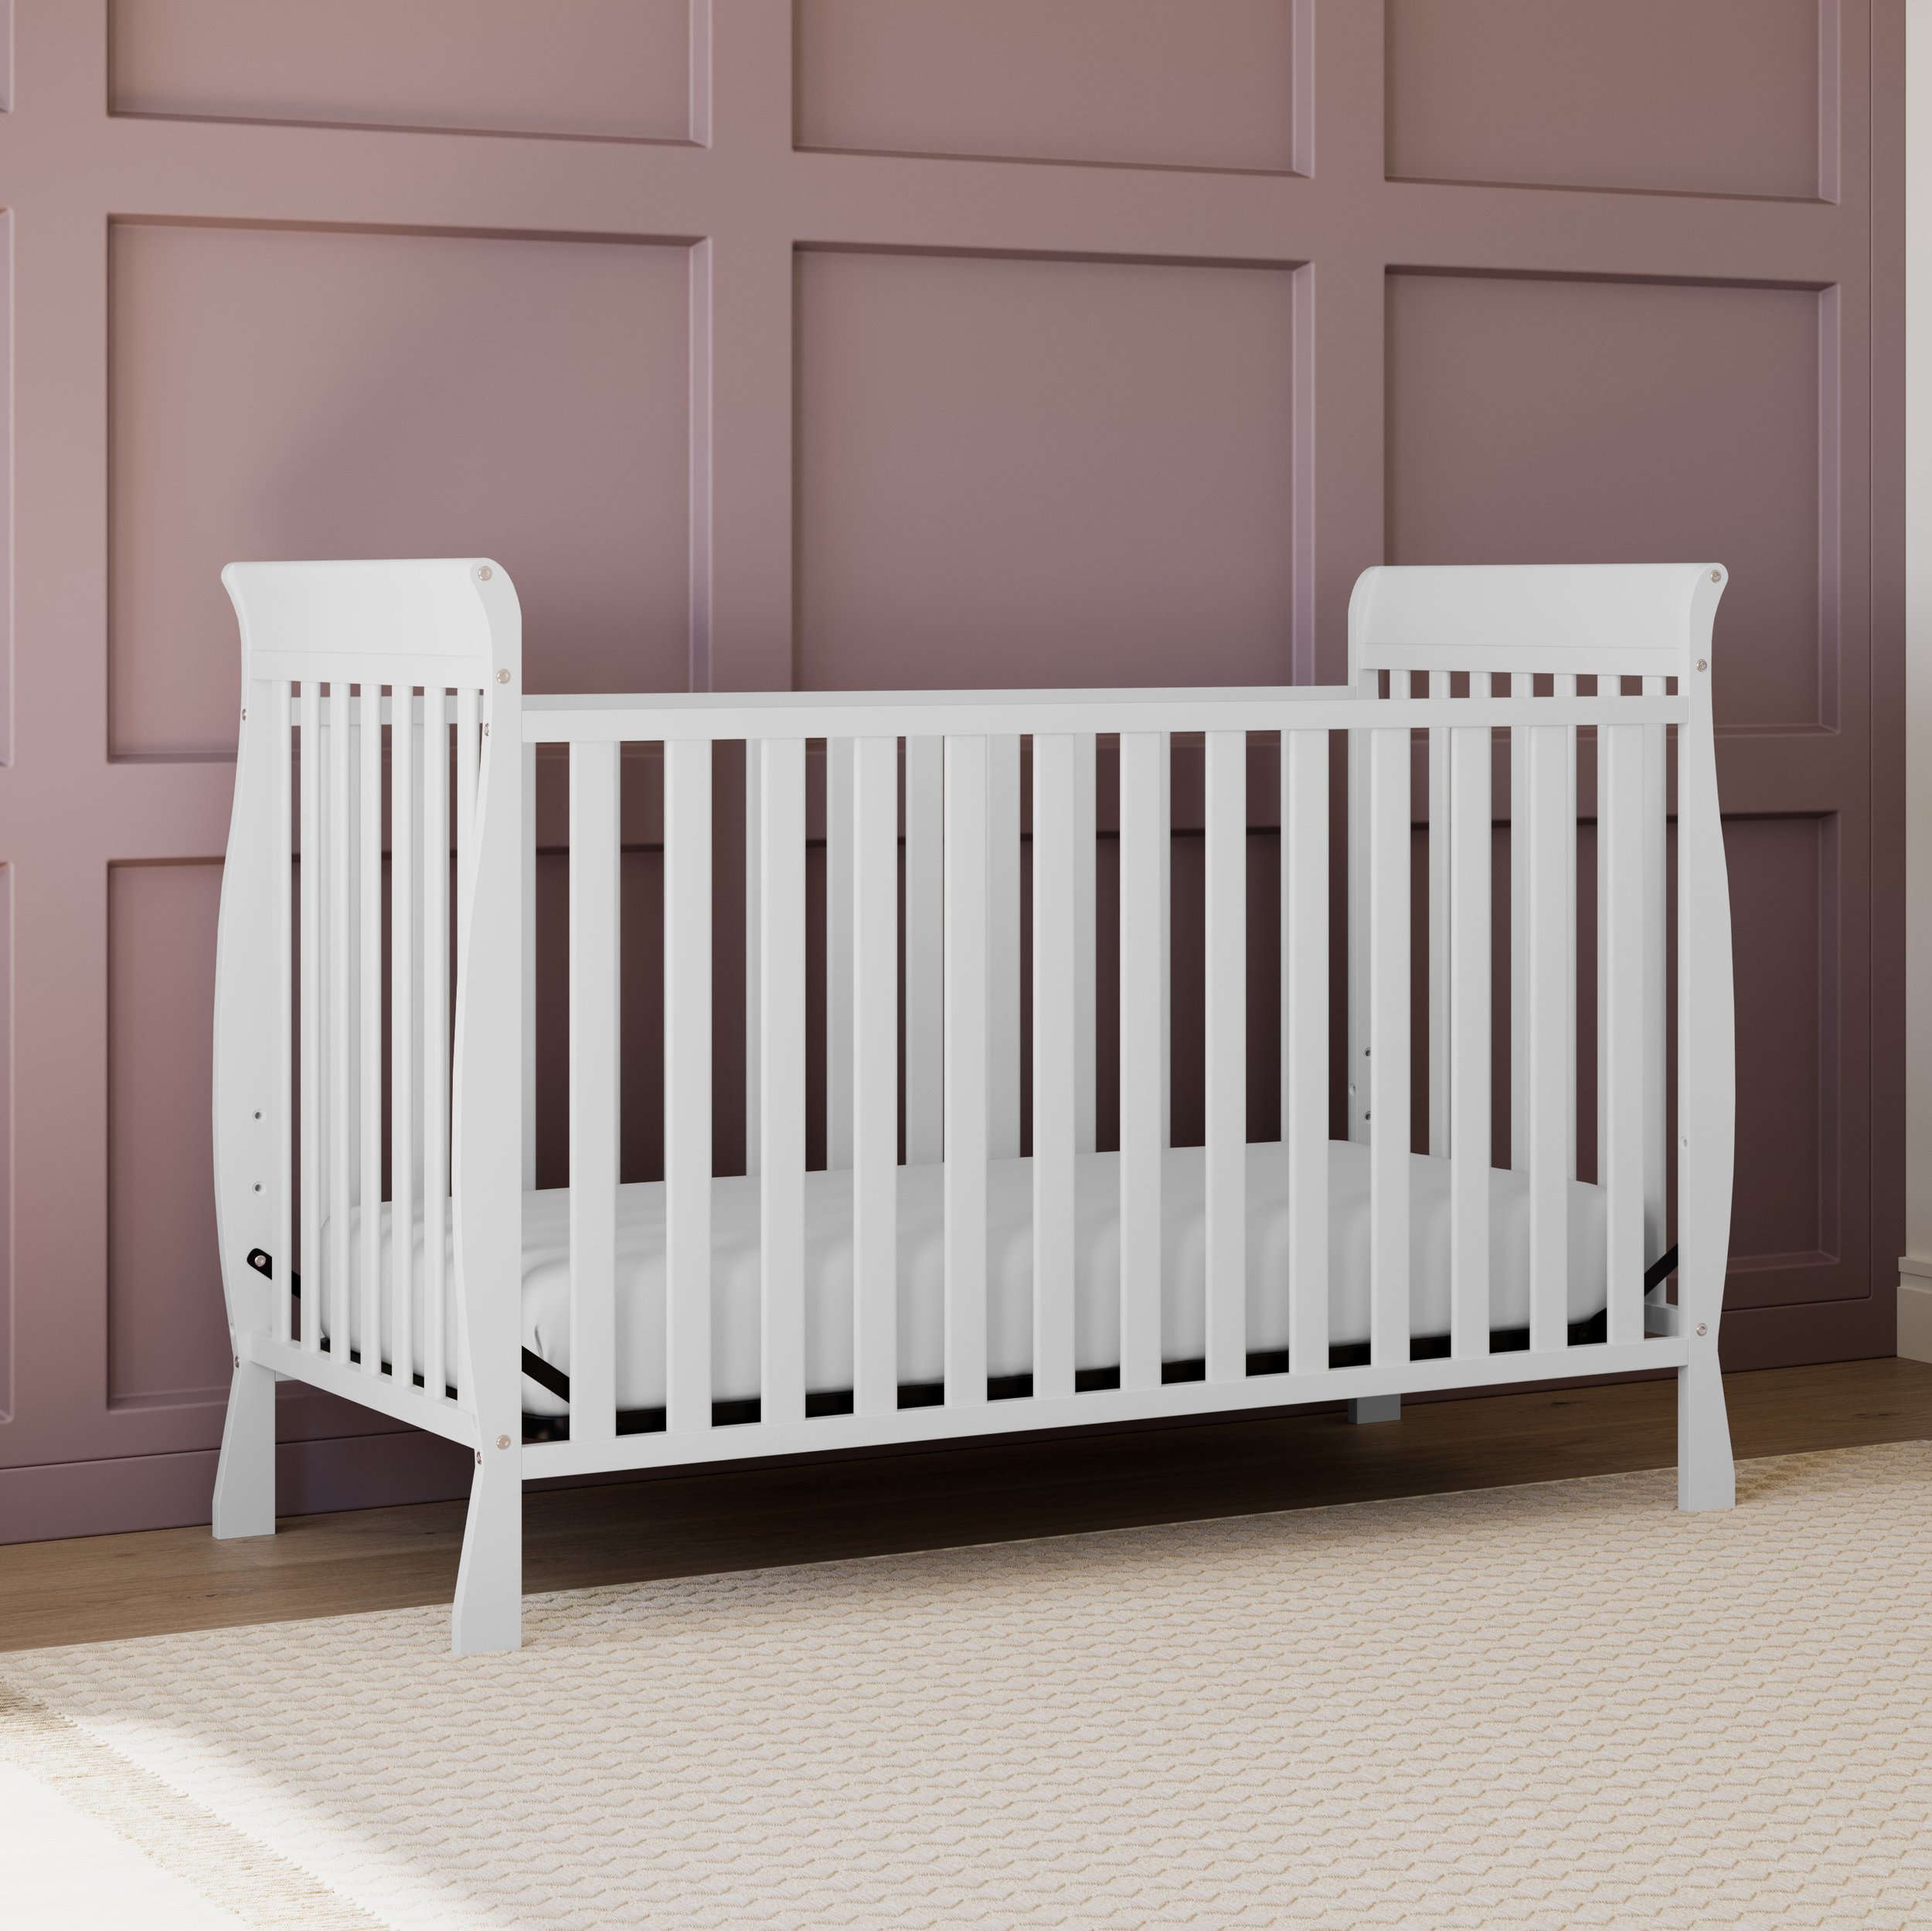 Sleigh Style Baby Crib Converts Into Daybed & Toddler Bed Fits Standard Size Baby Crib Mattress Jpma Certified Storkcraft Maxwell 3-in-1 Convertible Crib White 